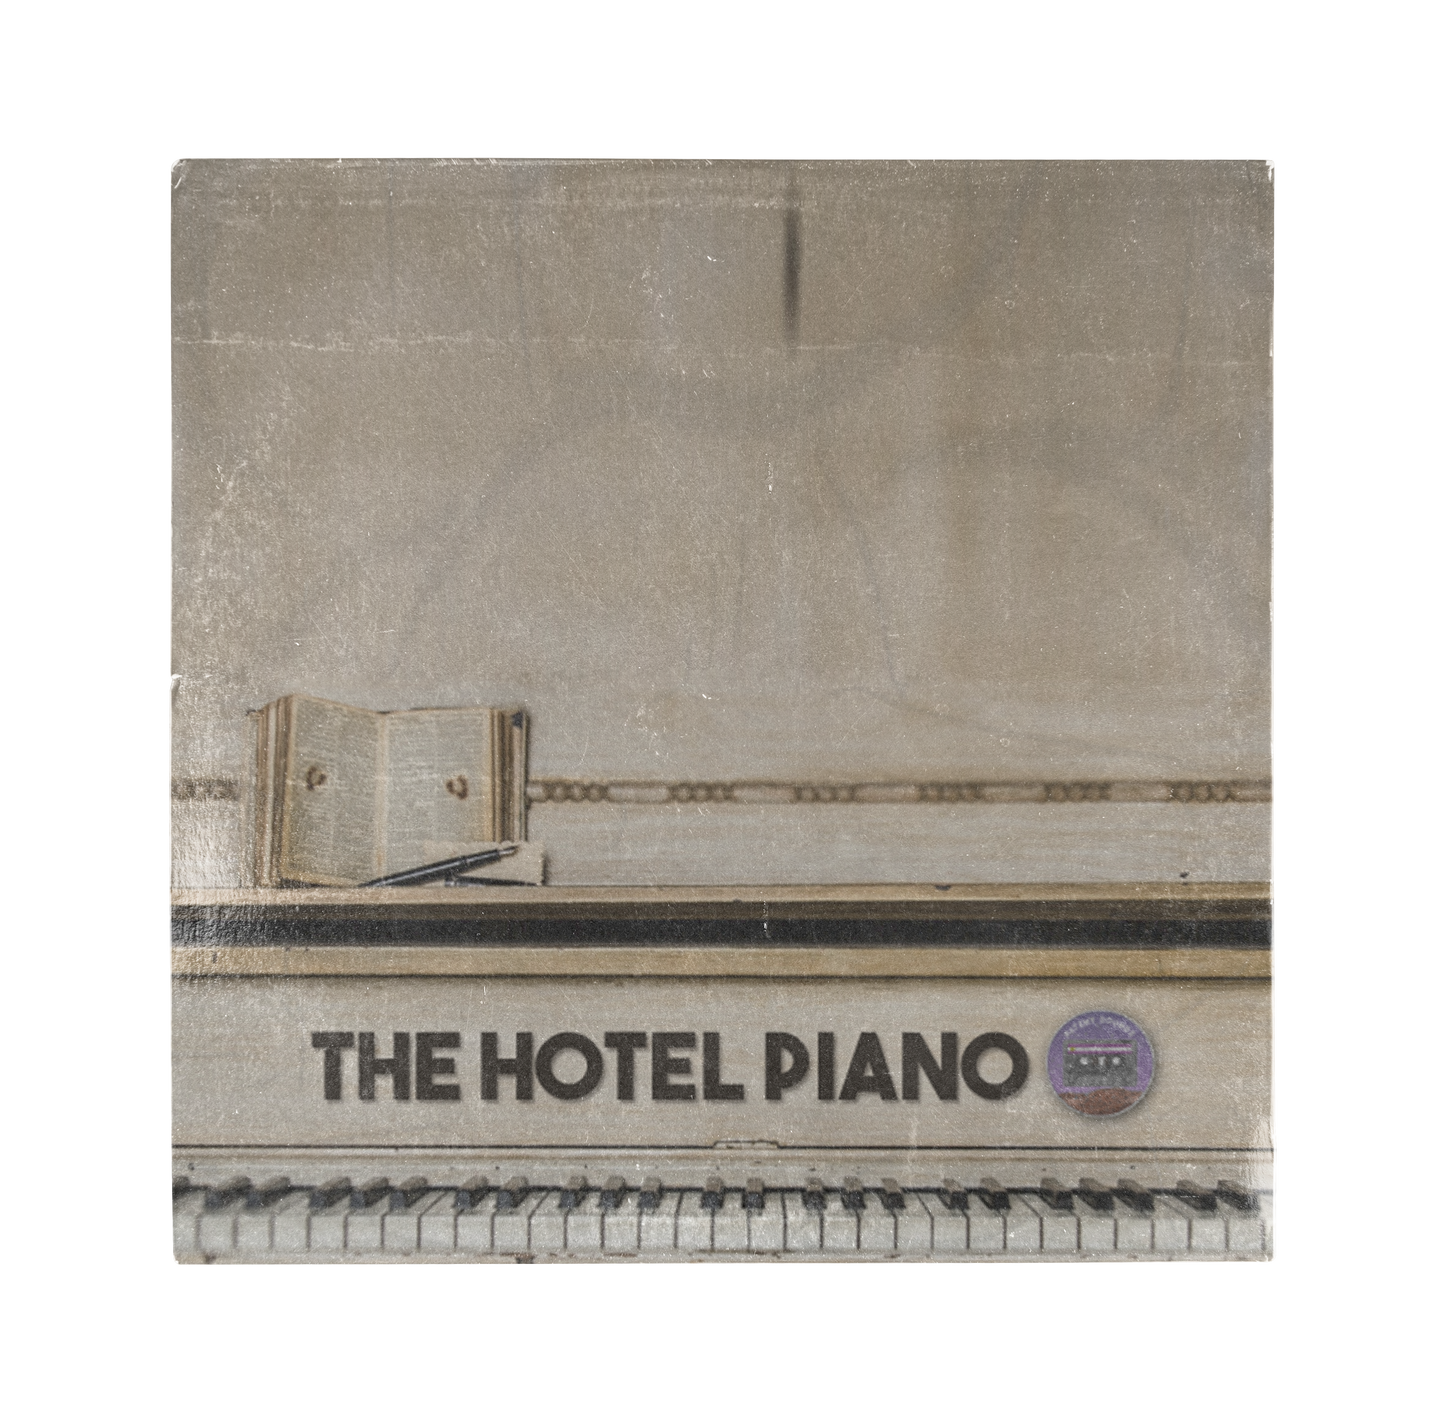 THE HOTEL PIANO - FREE LIBRARY FOR KONTAKT & DECENT SAMPLER